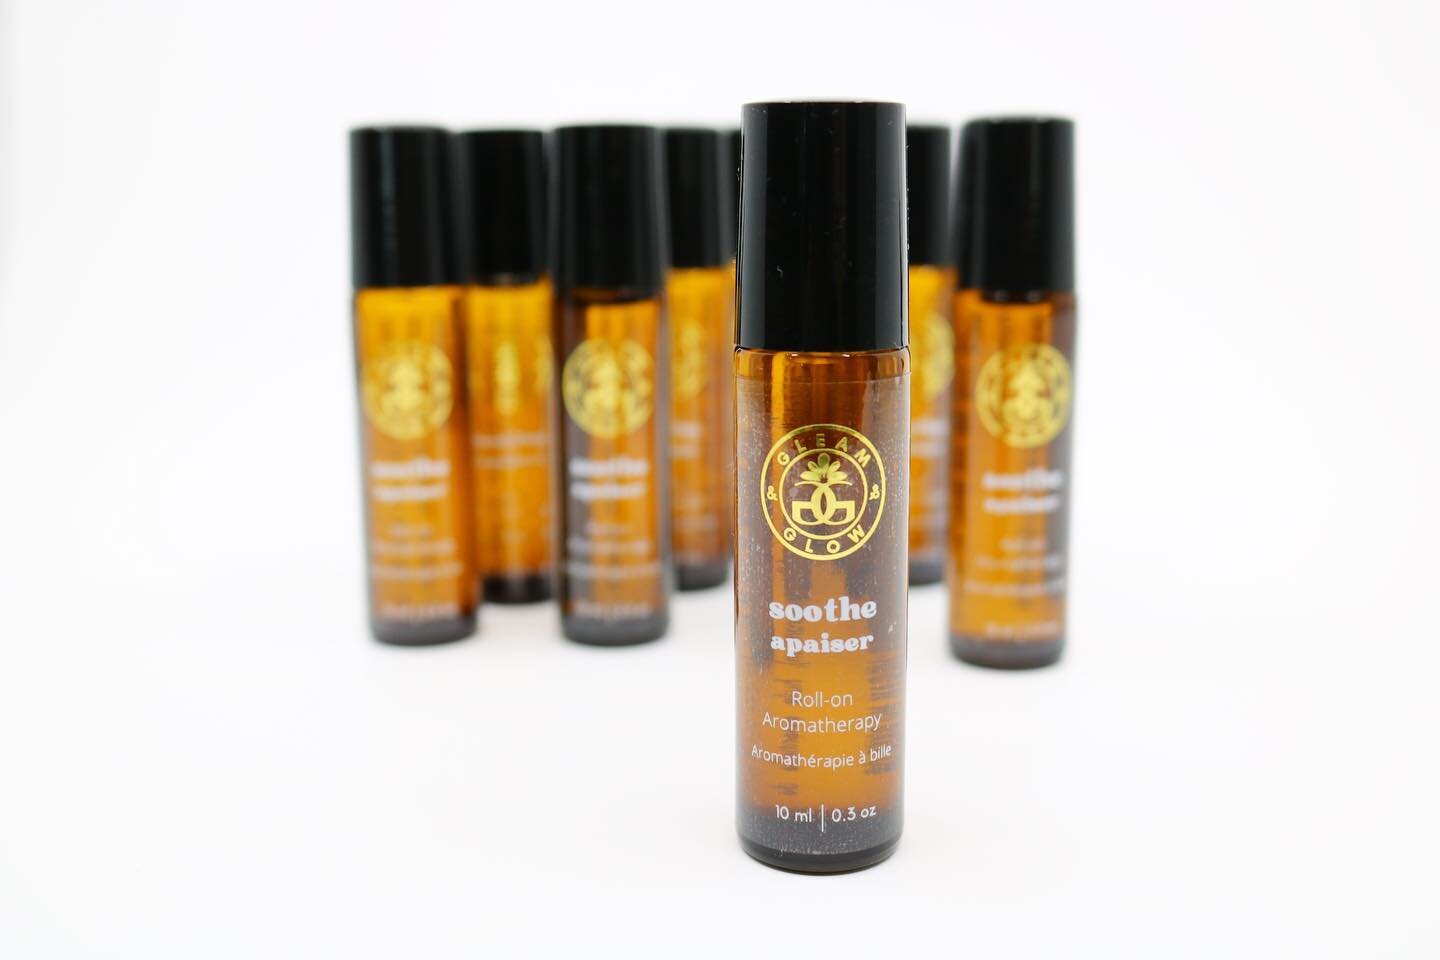 ⚡️PRODUCT DROP⚡️

Introducing the Soothe Aromatherapy Roll-On 🌱

GLEAM &amp; GLOW's pure essential oil roll-ons use high quality unadulterated essential oils in jojoba oil carrier oil. 

Carefully formulated with the following essential oils:
